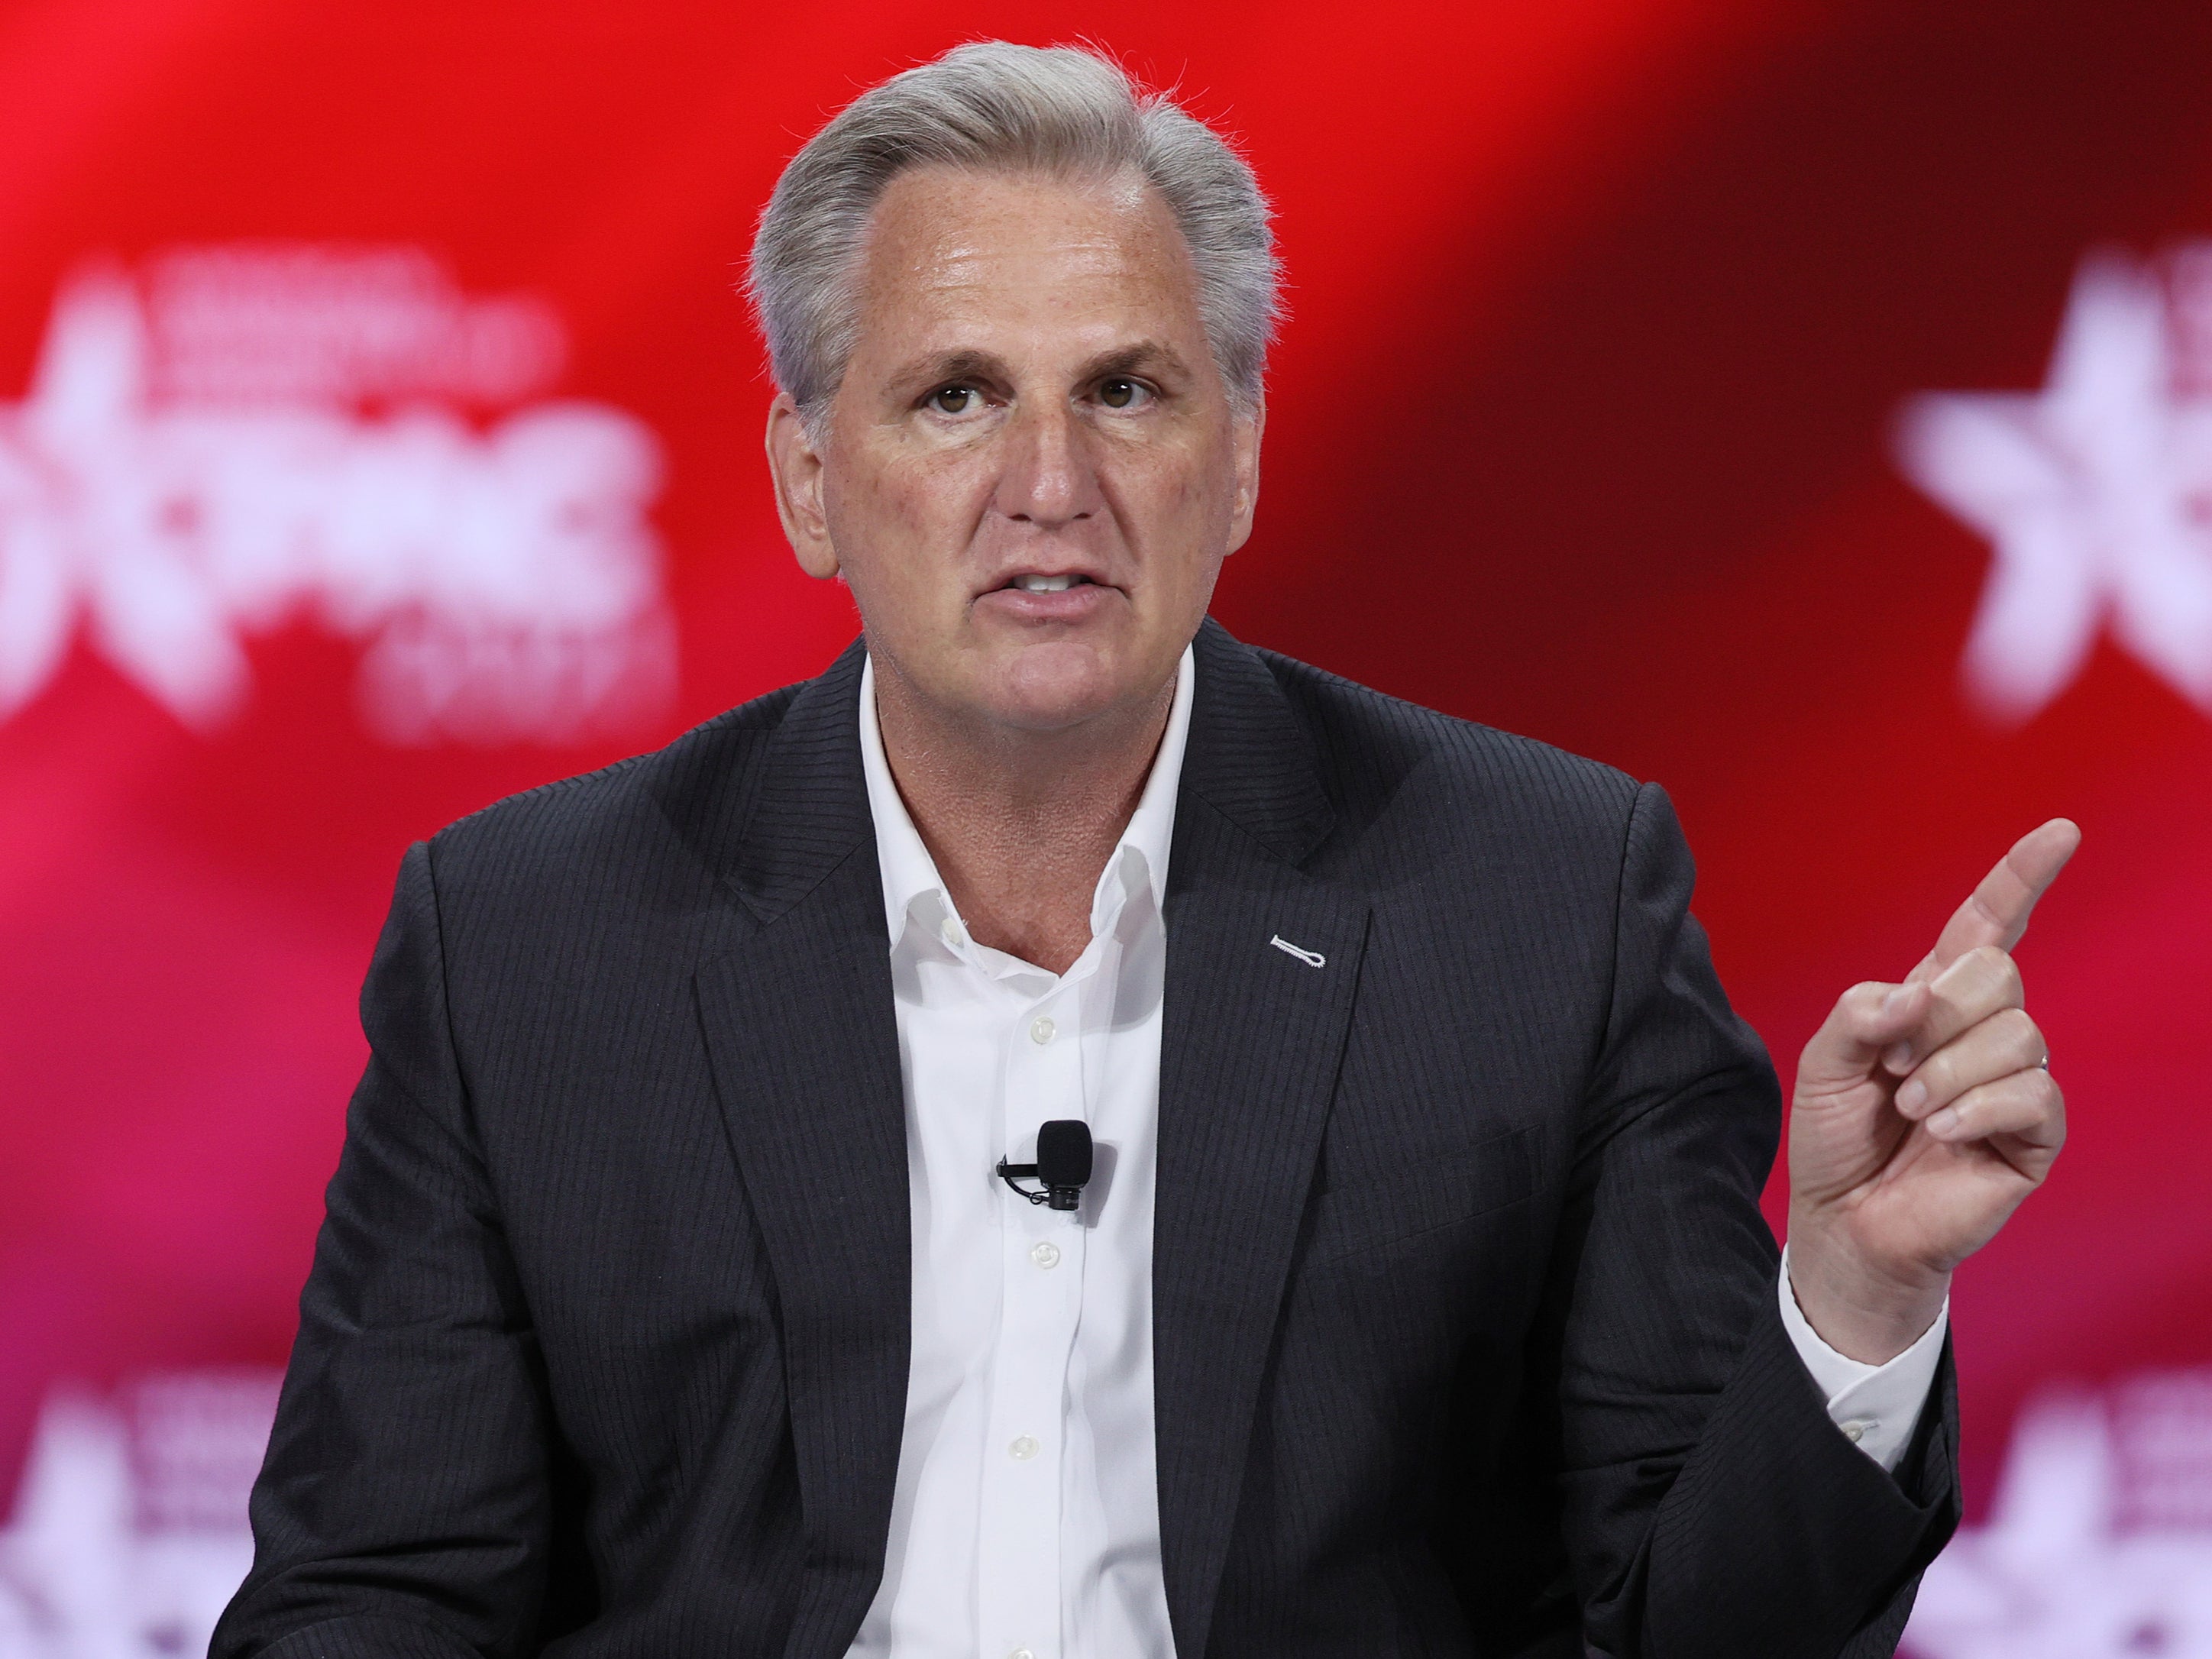 Kevin McCarthy participates in a discussion during CPAC on February 27, 2021 in Orlando, Florida.